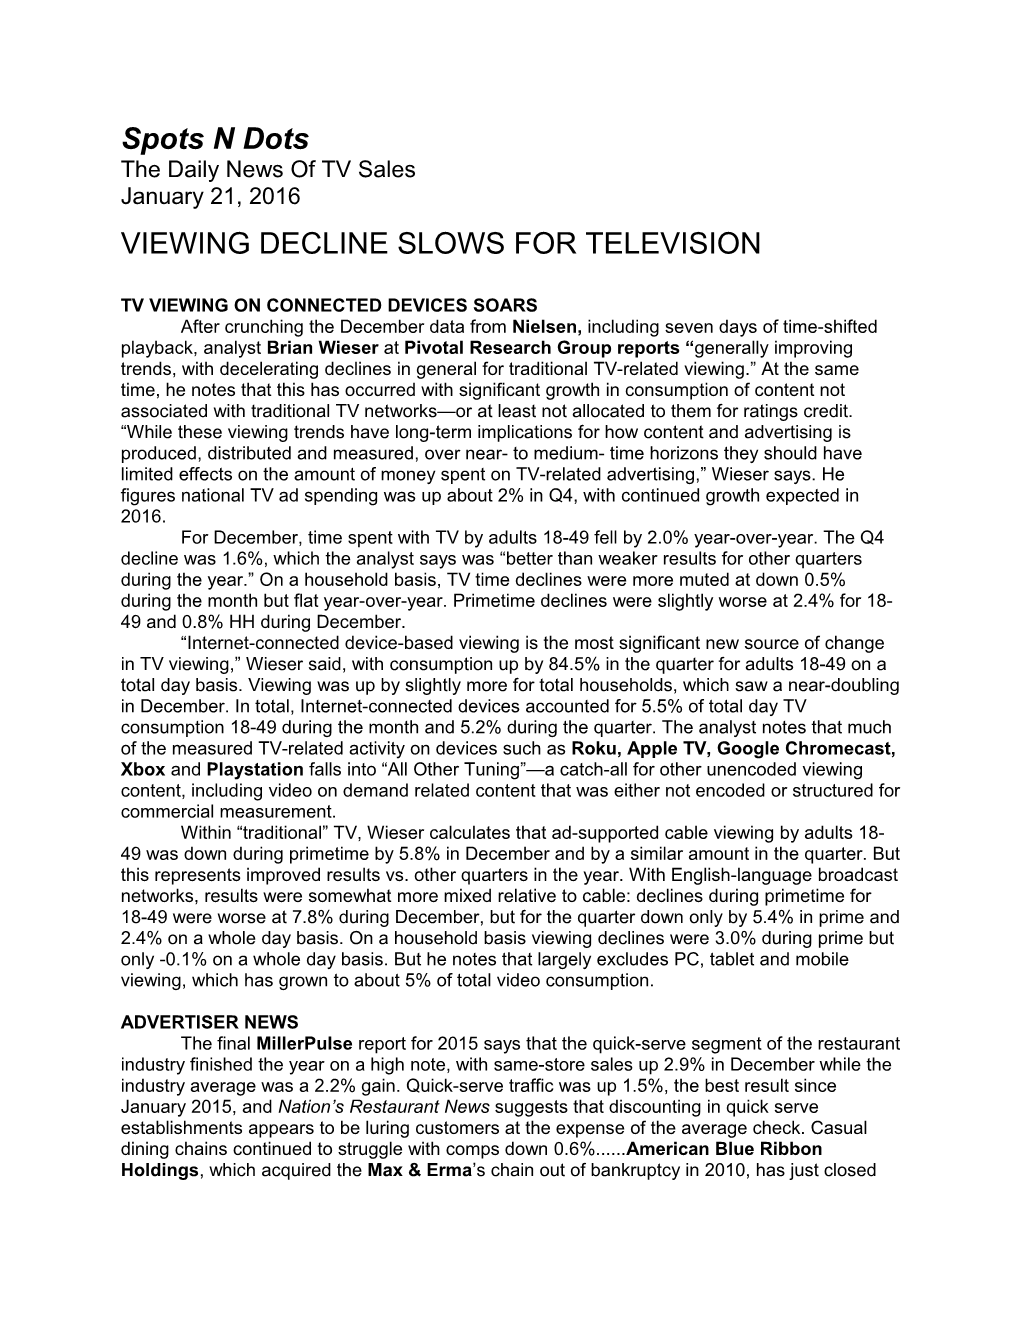 Tv Viewing on Connected Devices Soars